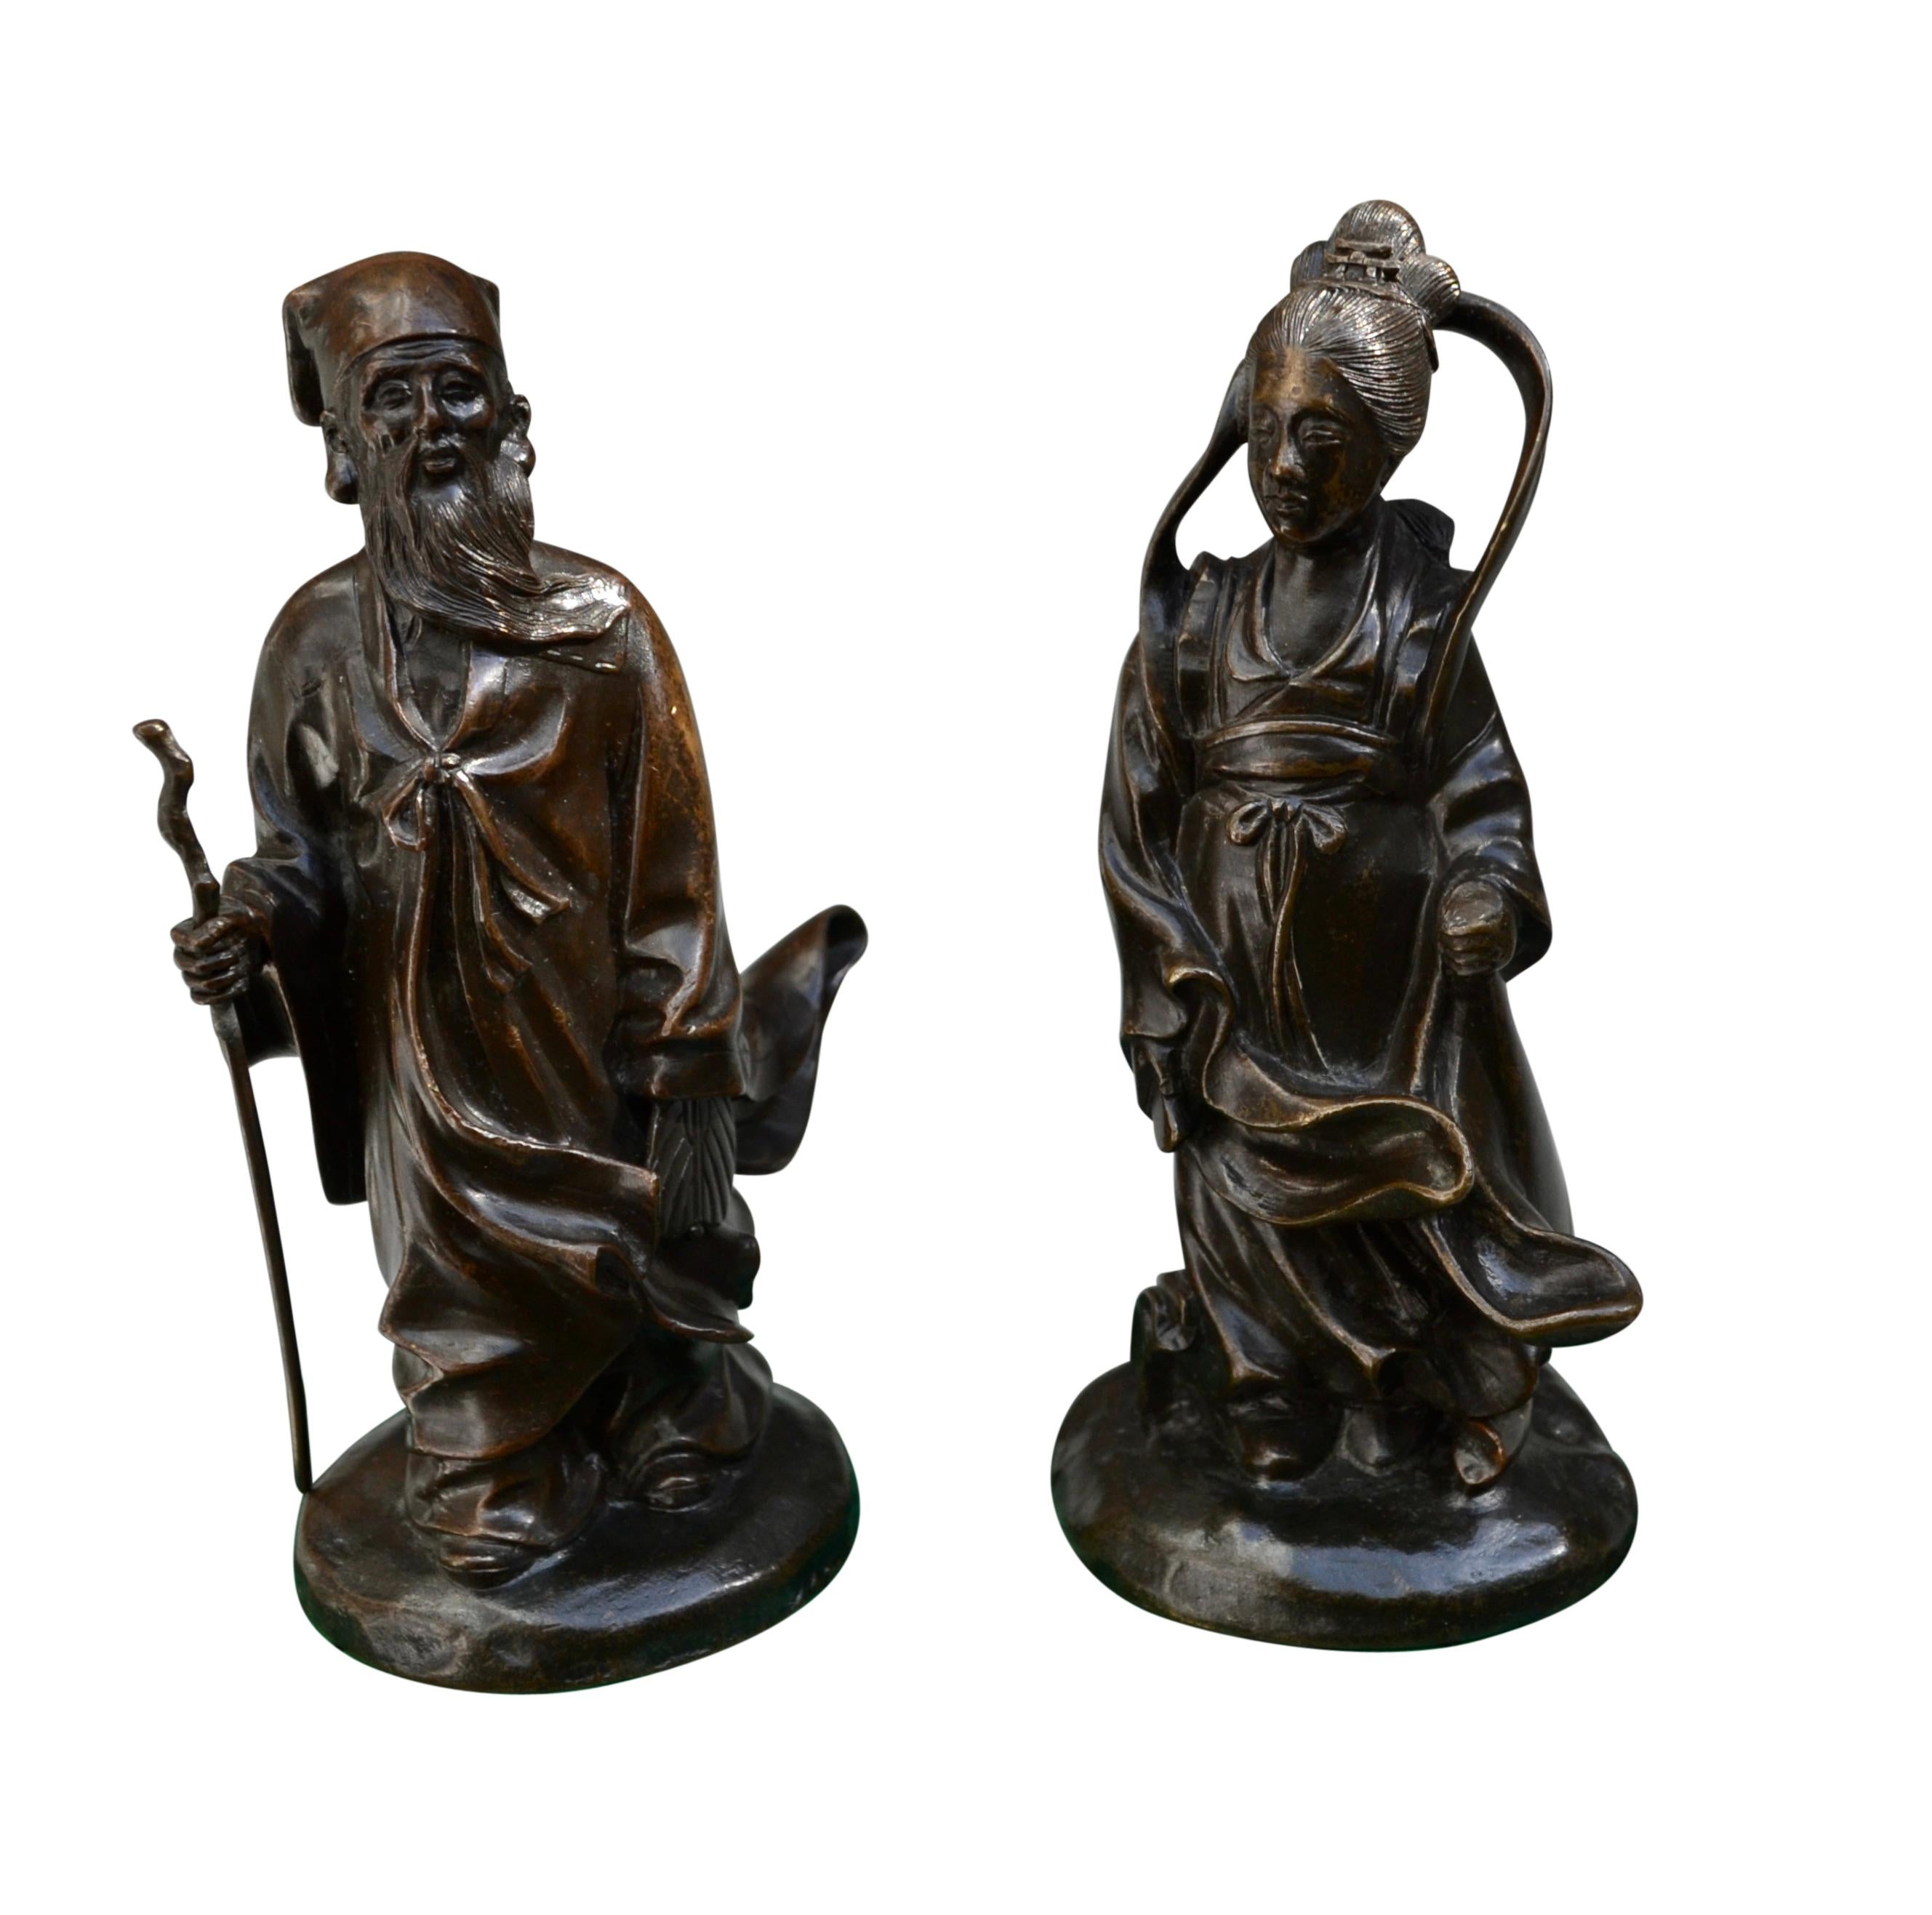 Ming A Pair of Small 19 Century Chinese Patinated Bronze Statues of Gods or Deities   For Sale